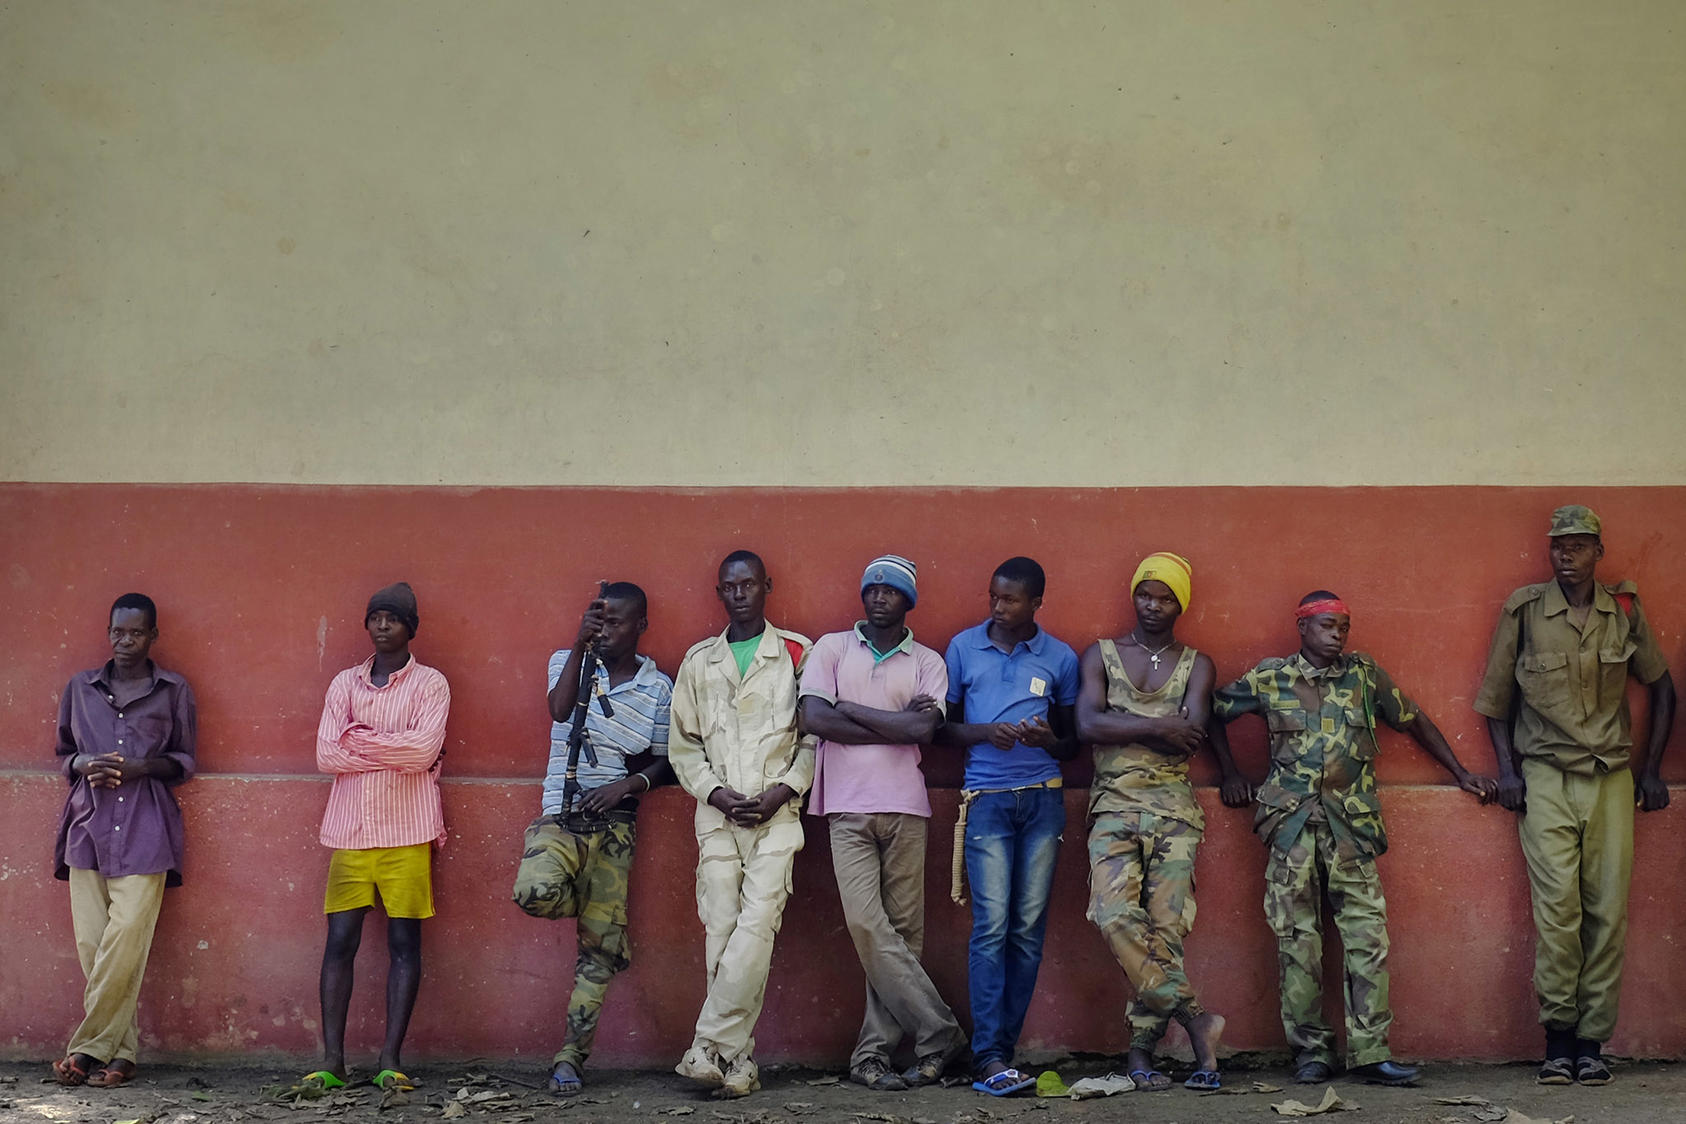 Men affiliated with the anti-Balaka movement—one of the groups that benefit from the Central African Republic’s coffee trade—in May 2014. (Jerome Delay/AP)